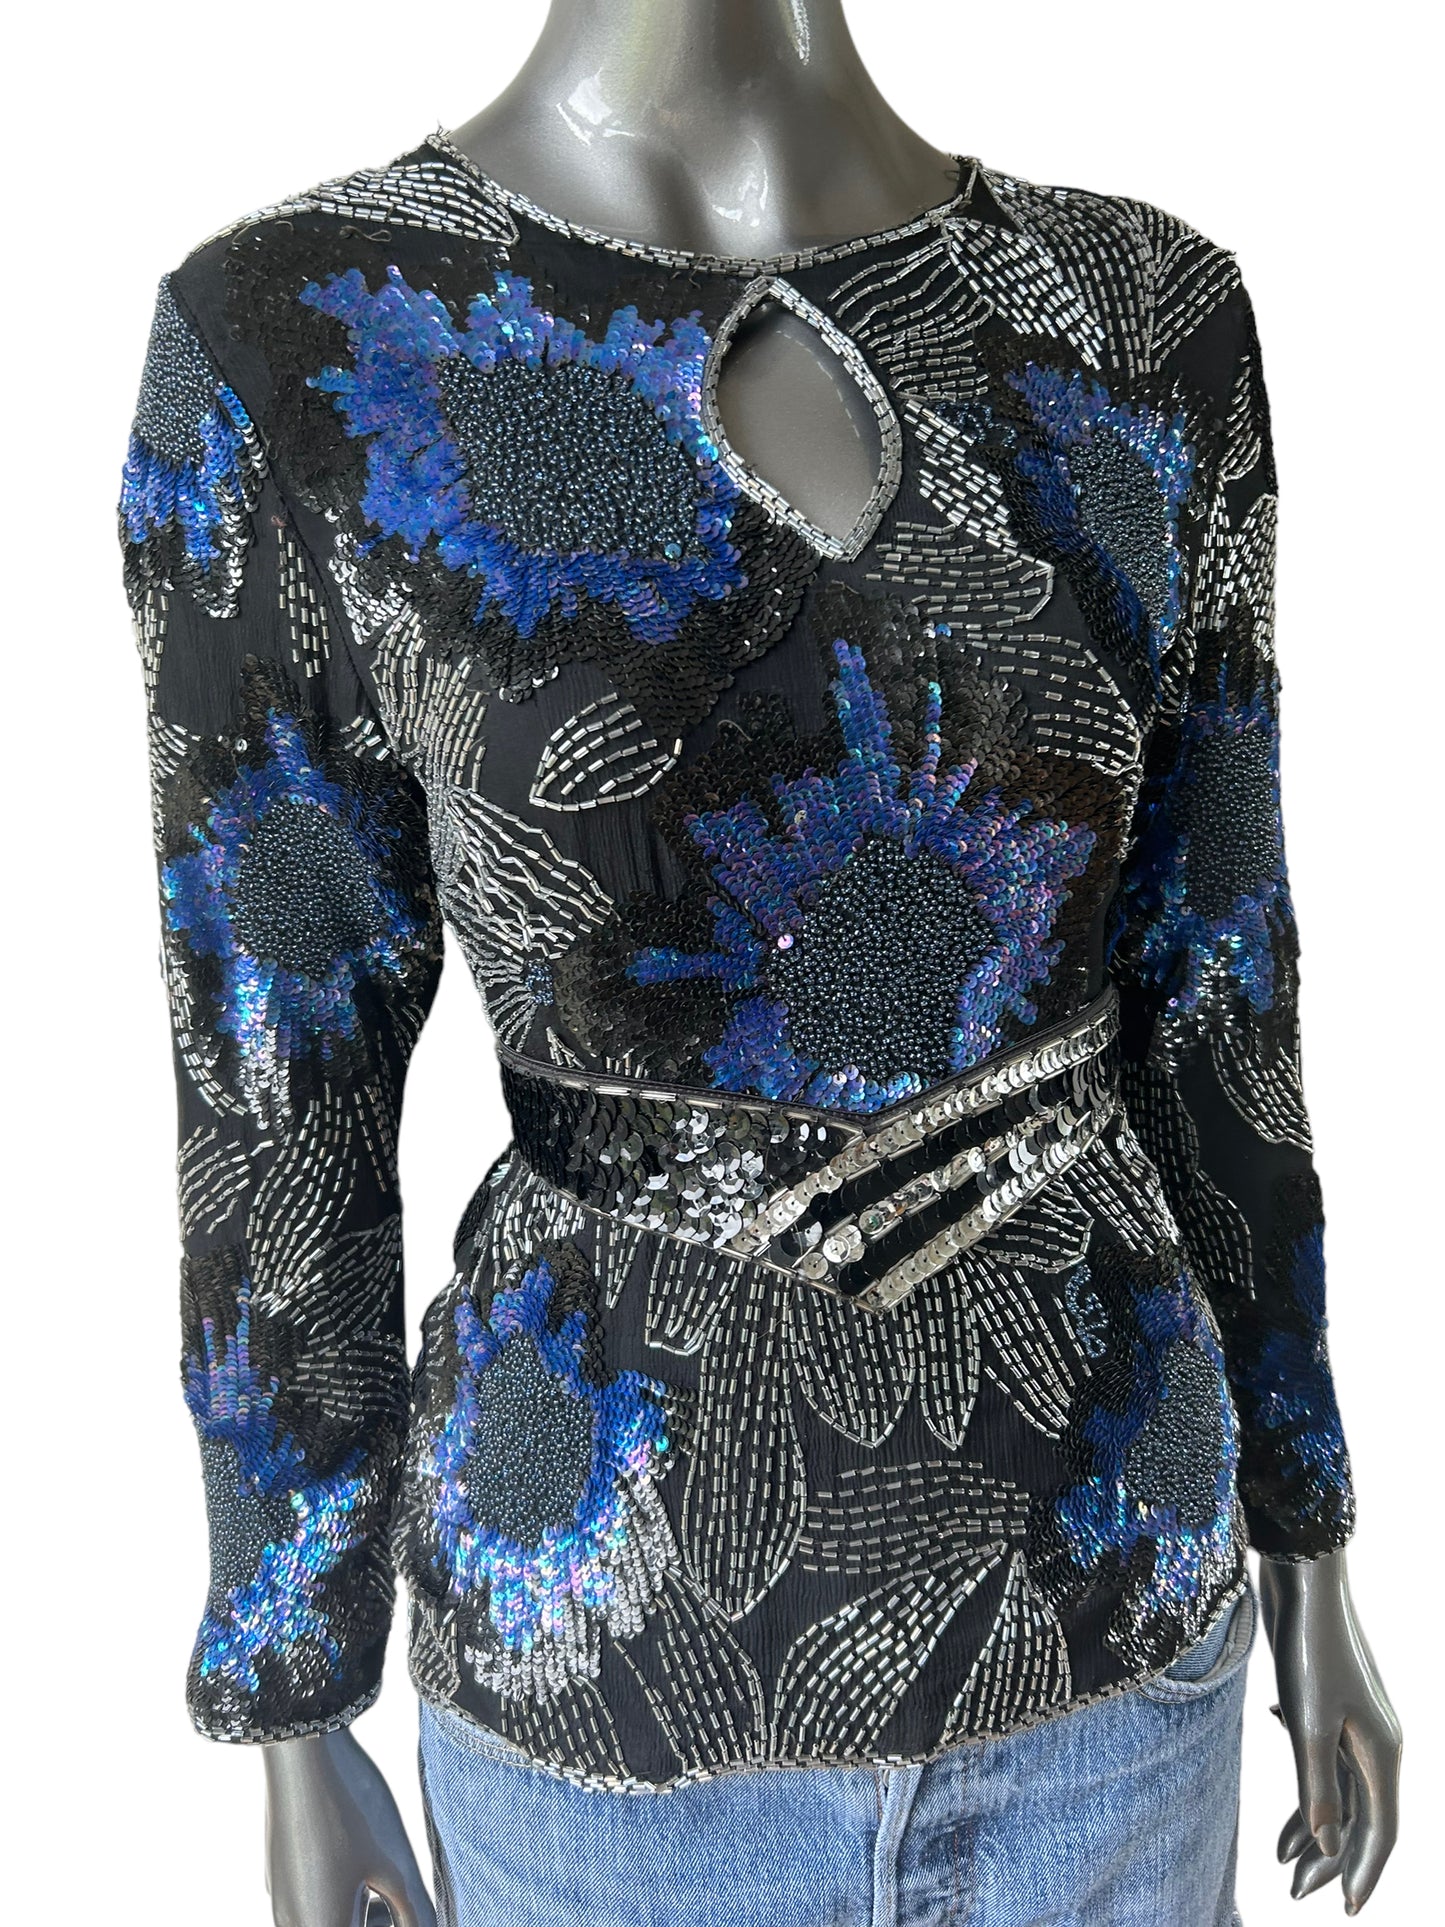 Vintage 1980/ Sequin and Beaded Tunic Statement Top SALE